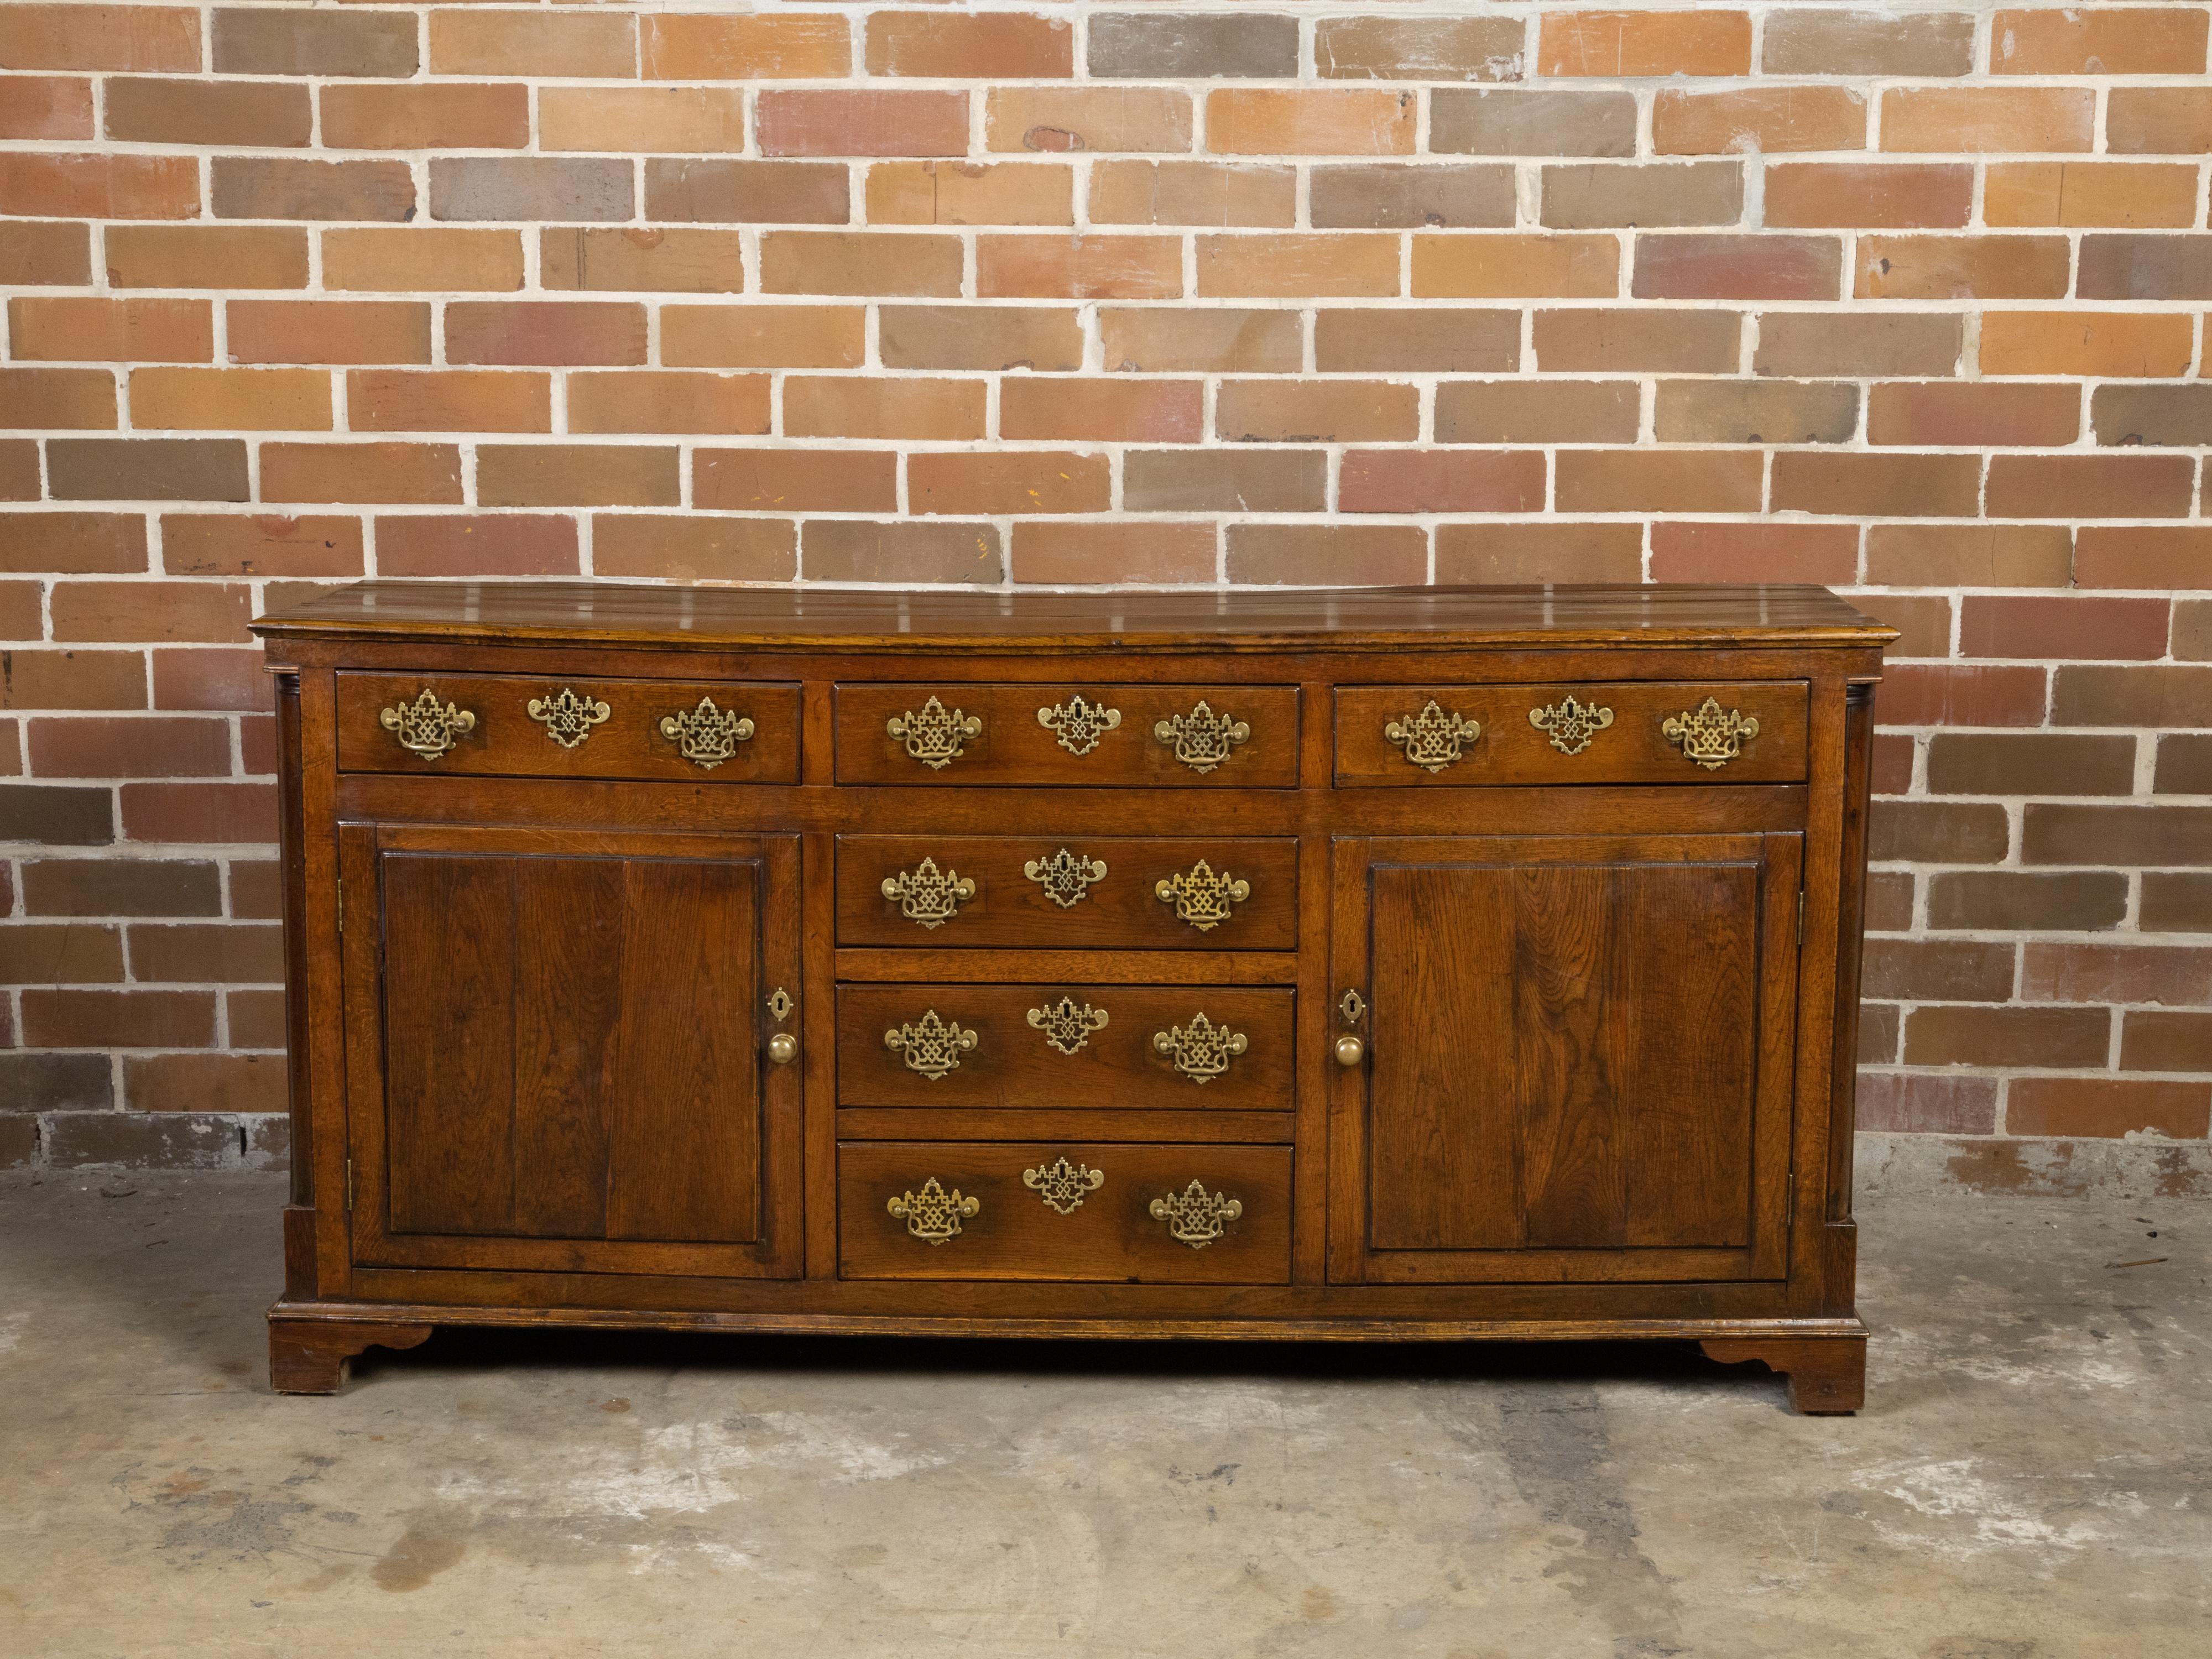 An English oak dresser base from the early 19th century with T-shaped drawers, semi Doric columns, two doors and brass Chippendale style hardware. Created in England during the first quarter of the 19th century, this oak dresser base features a